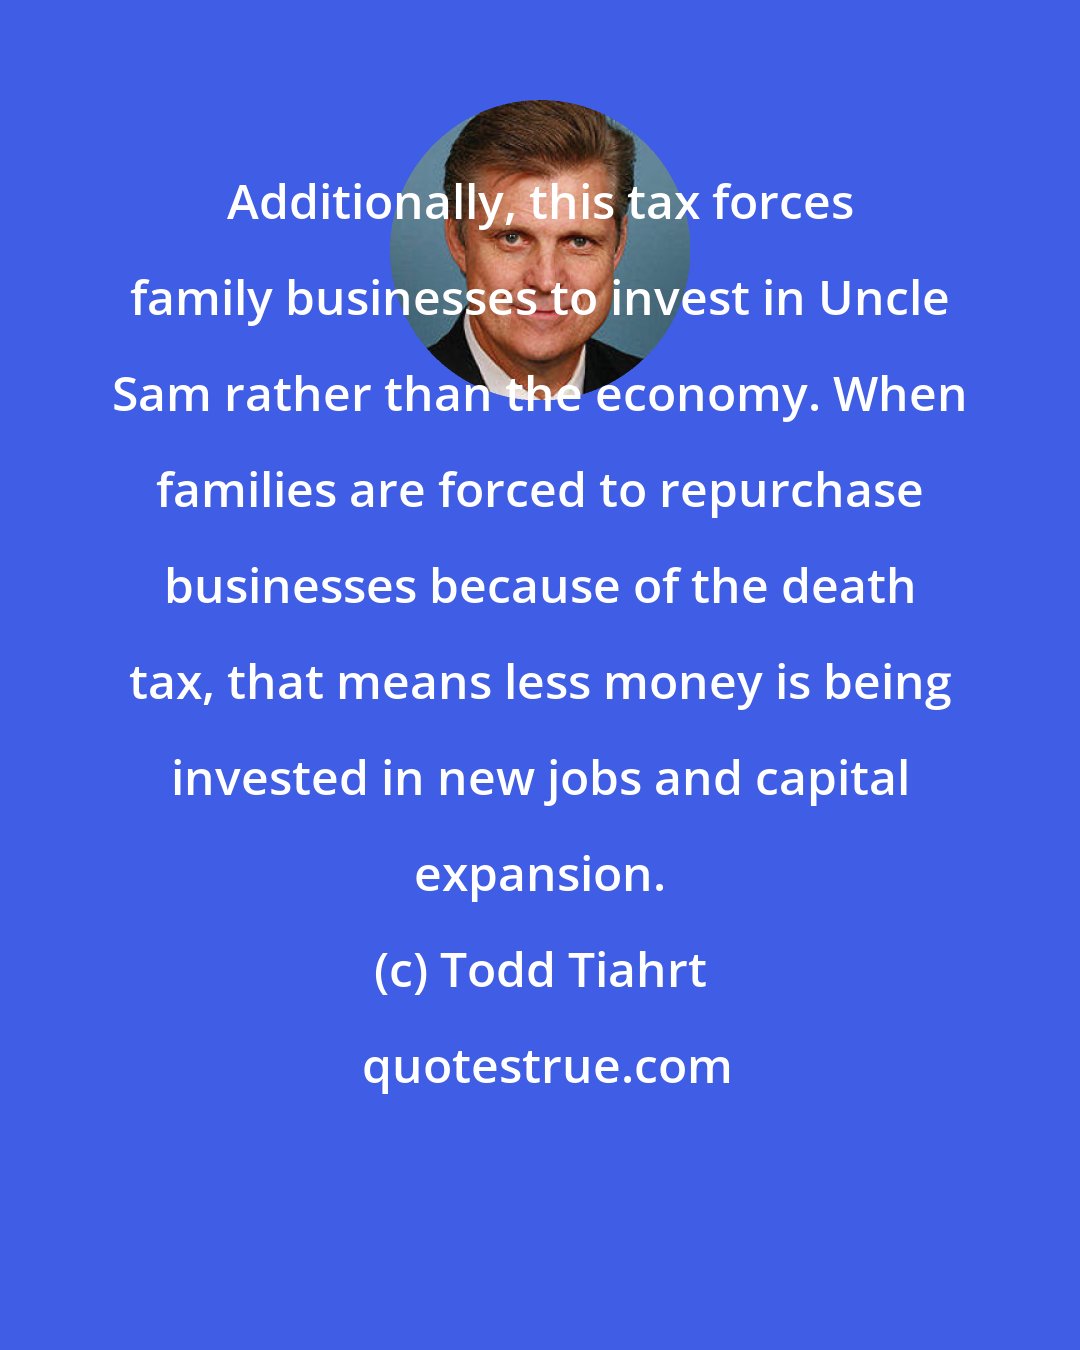 Todd Tiahrt: Additionally, this tax forces family businesses to invest in Uncle Sam rather than the economy. When families are forced to repurchase businesses because of the death tax, that means less money is being invested in new jobs and capital expansion.